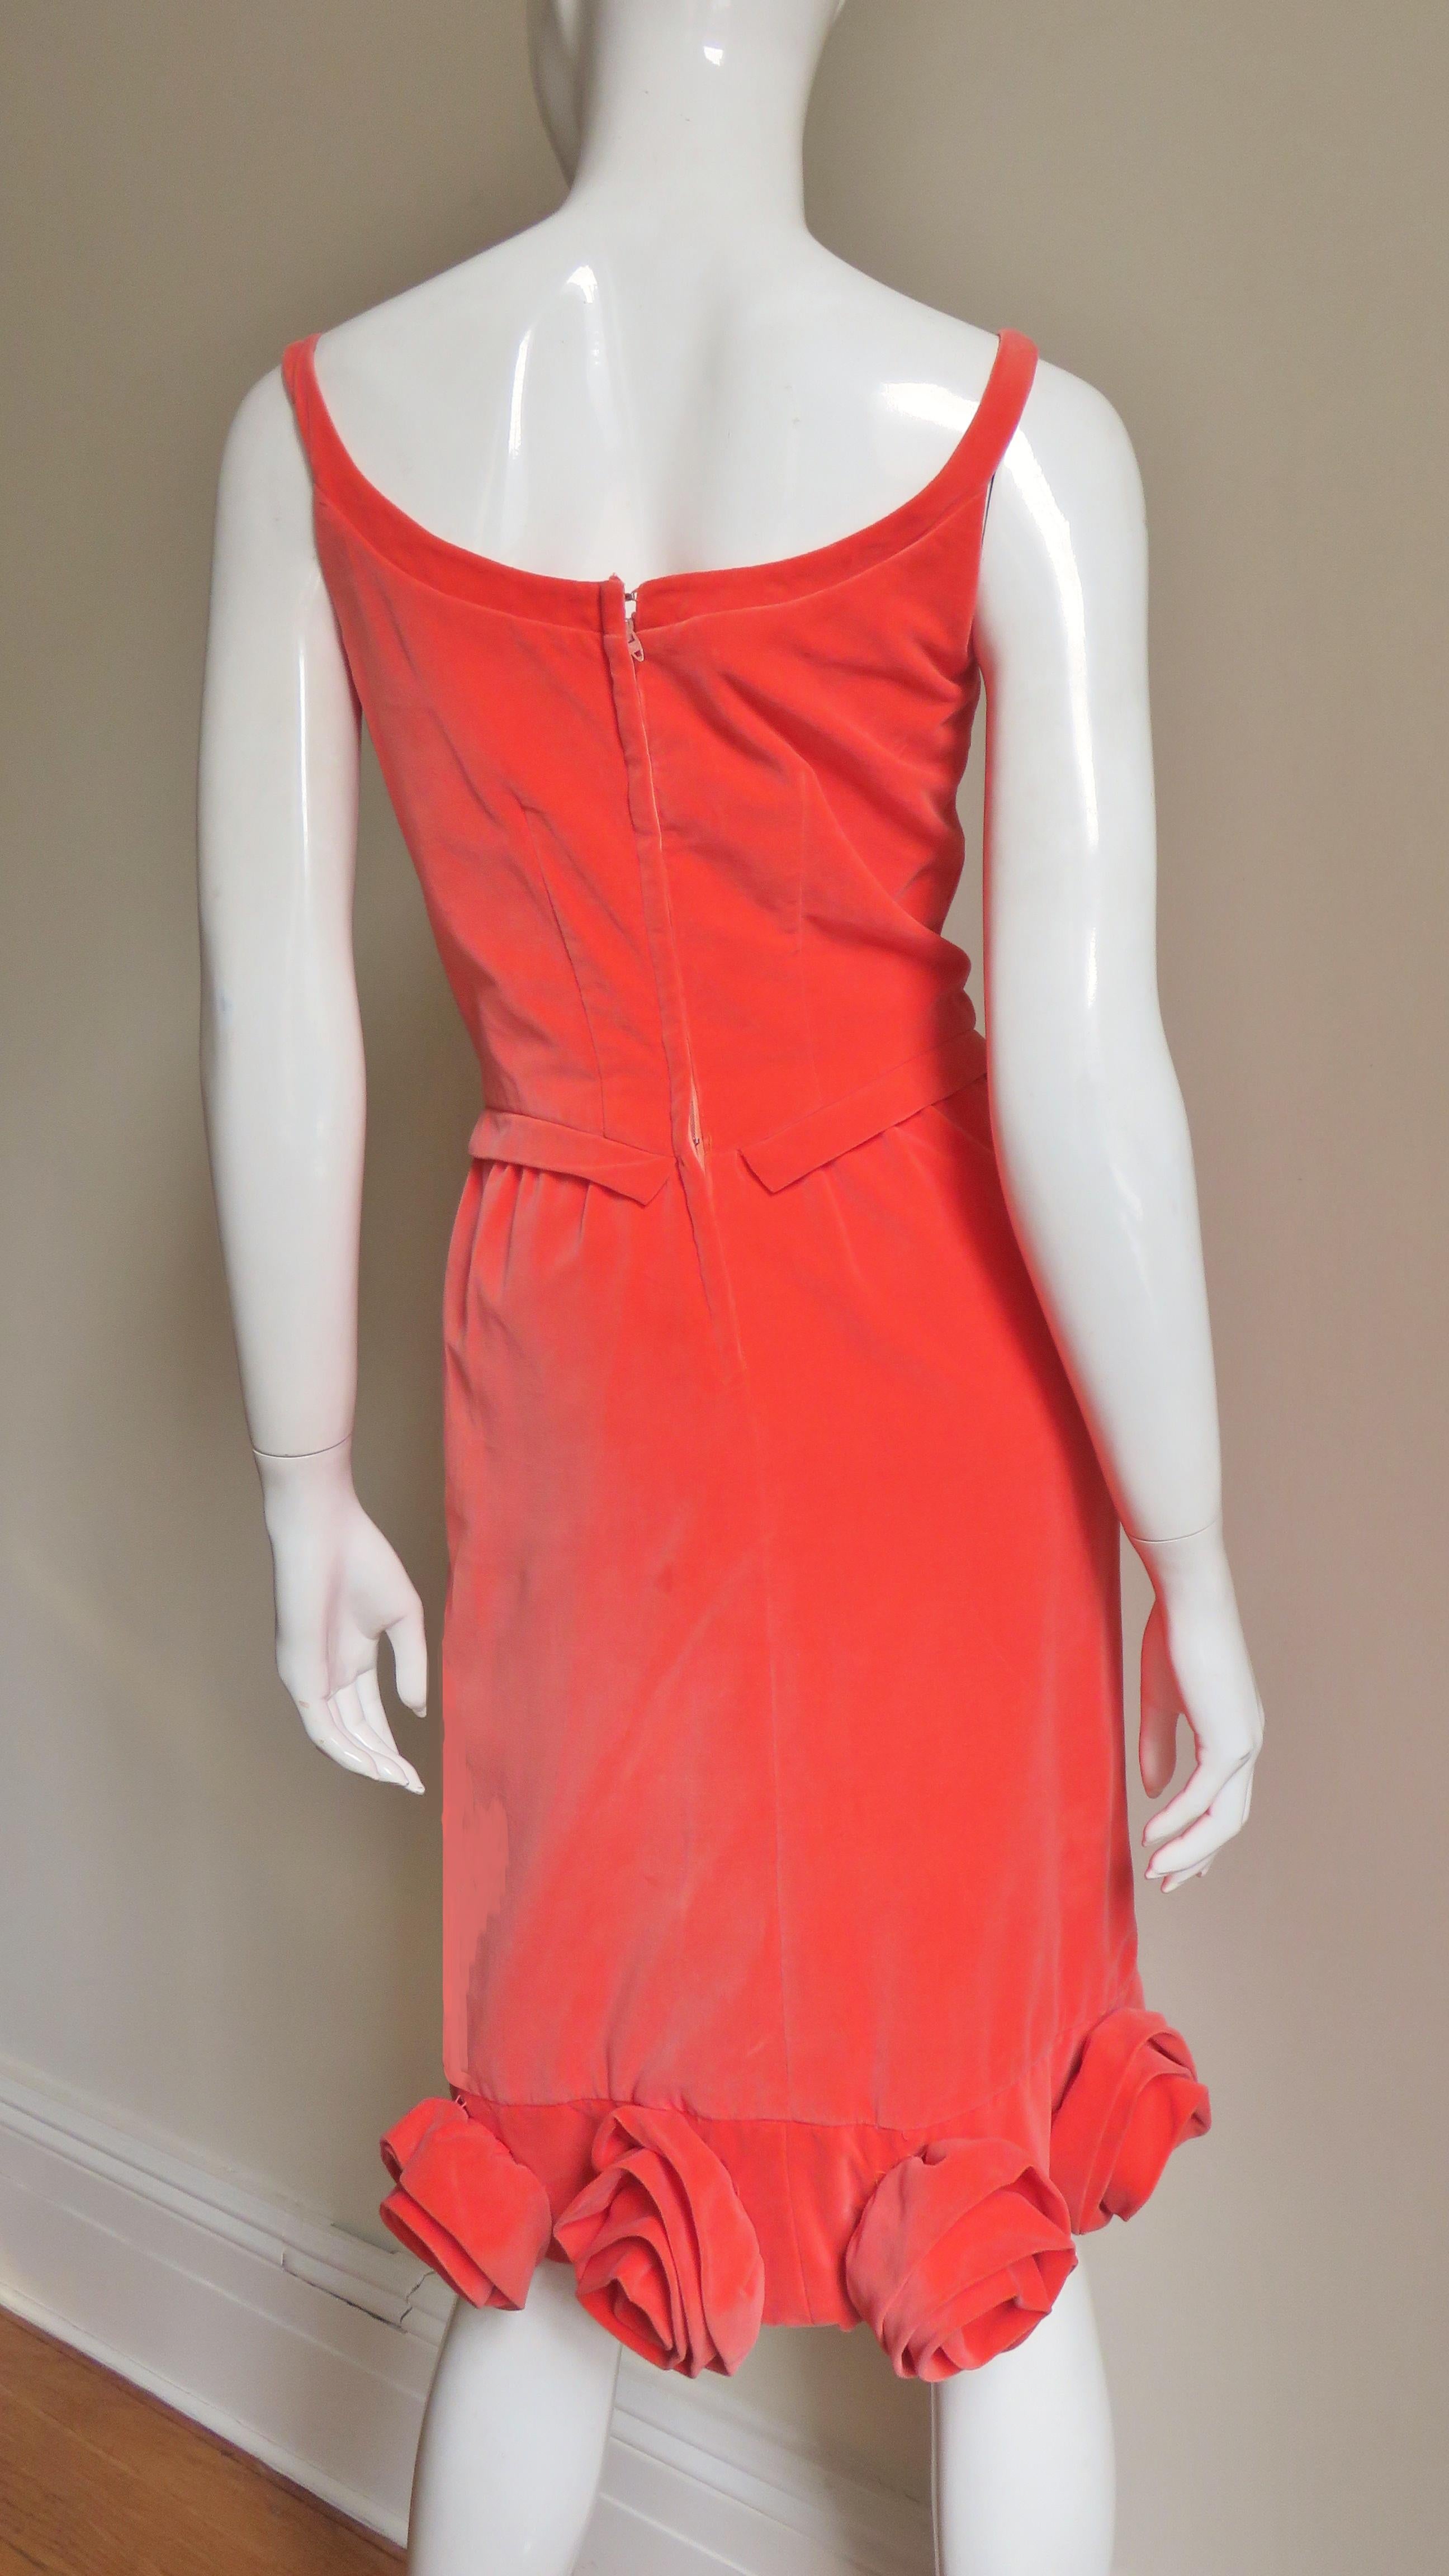 Emma Domb Dress with Rose Appliques 1960s For Sale 6